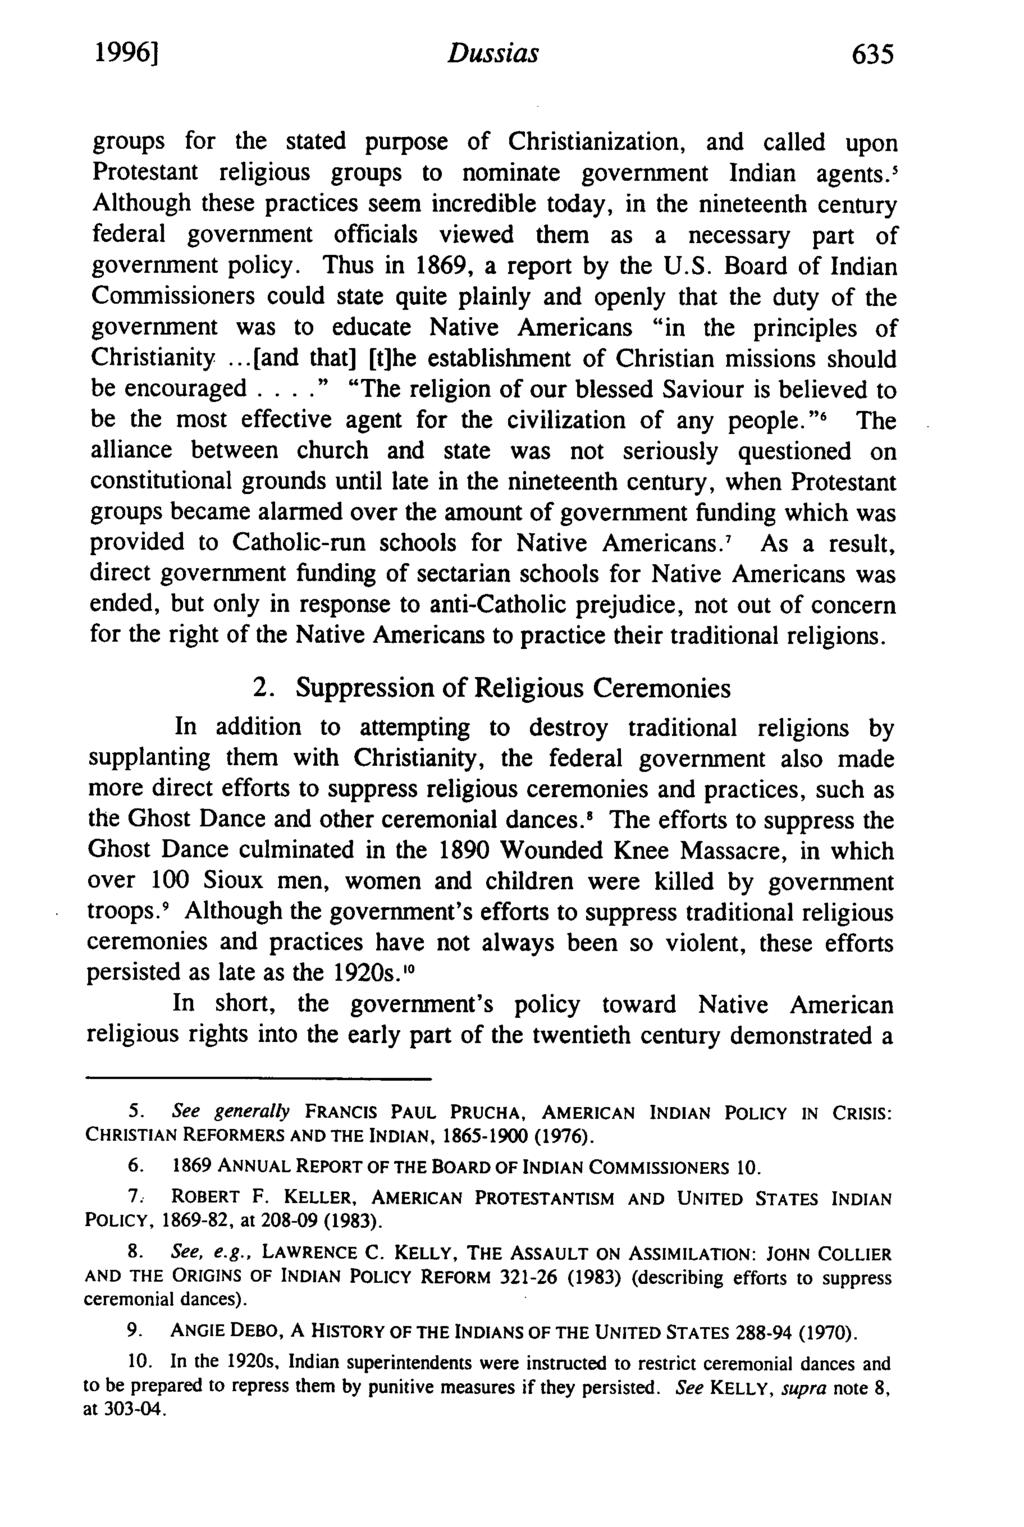 1996] Dussias groups for the stated purpose of Christianization, and called upon Protestant religious groups to nominate government Indian agents.